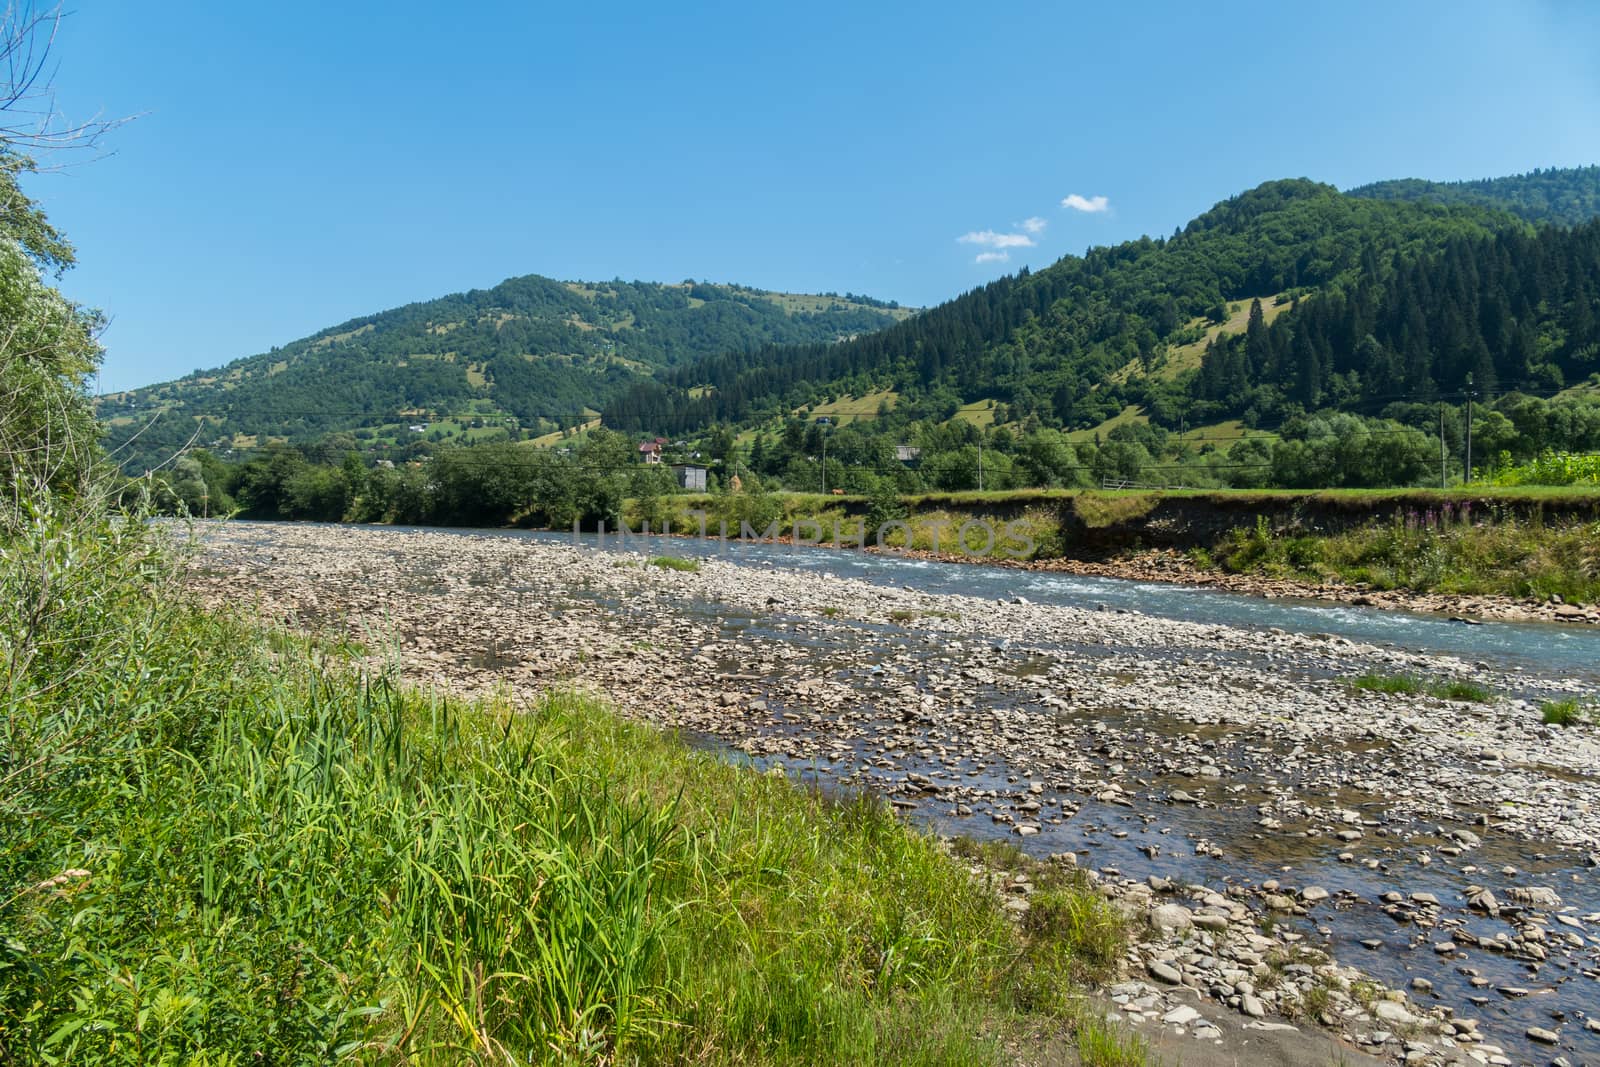 A picturesque view of a shallow mountain river against the backdrop of a beautiful rural village